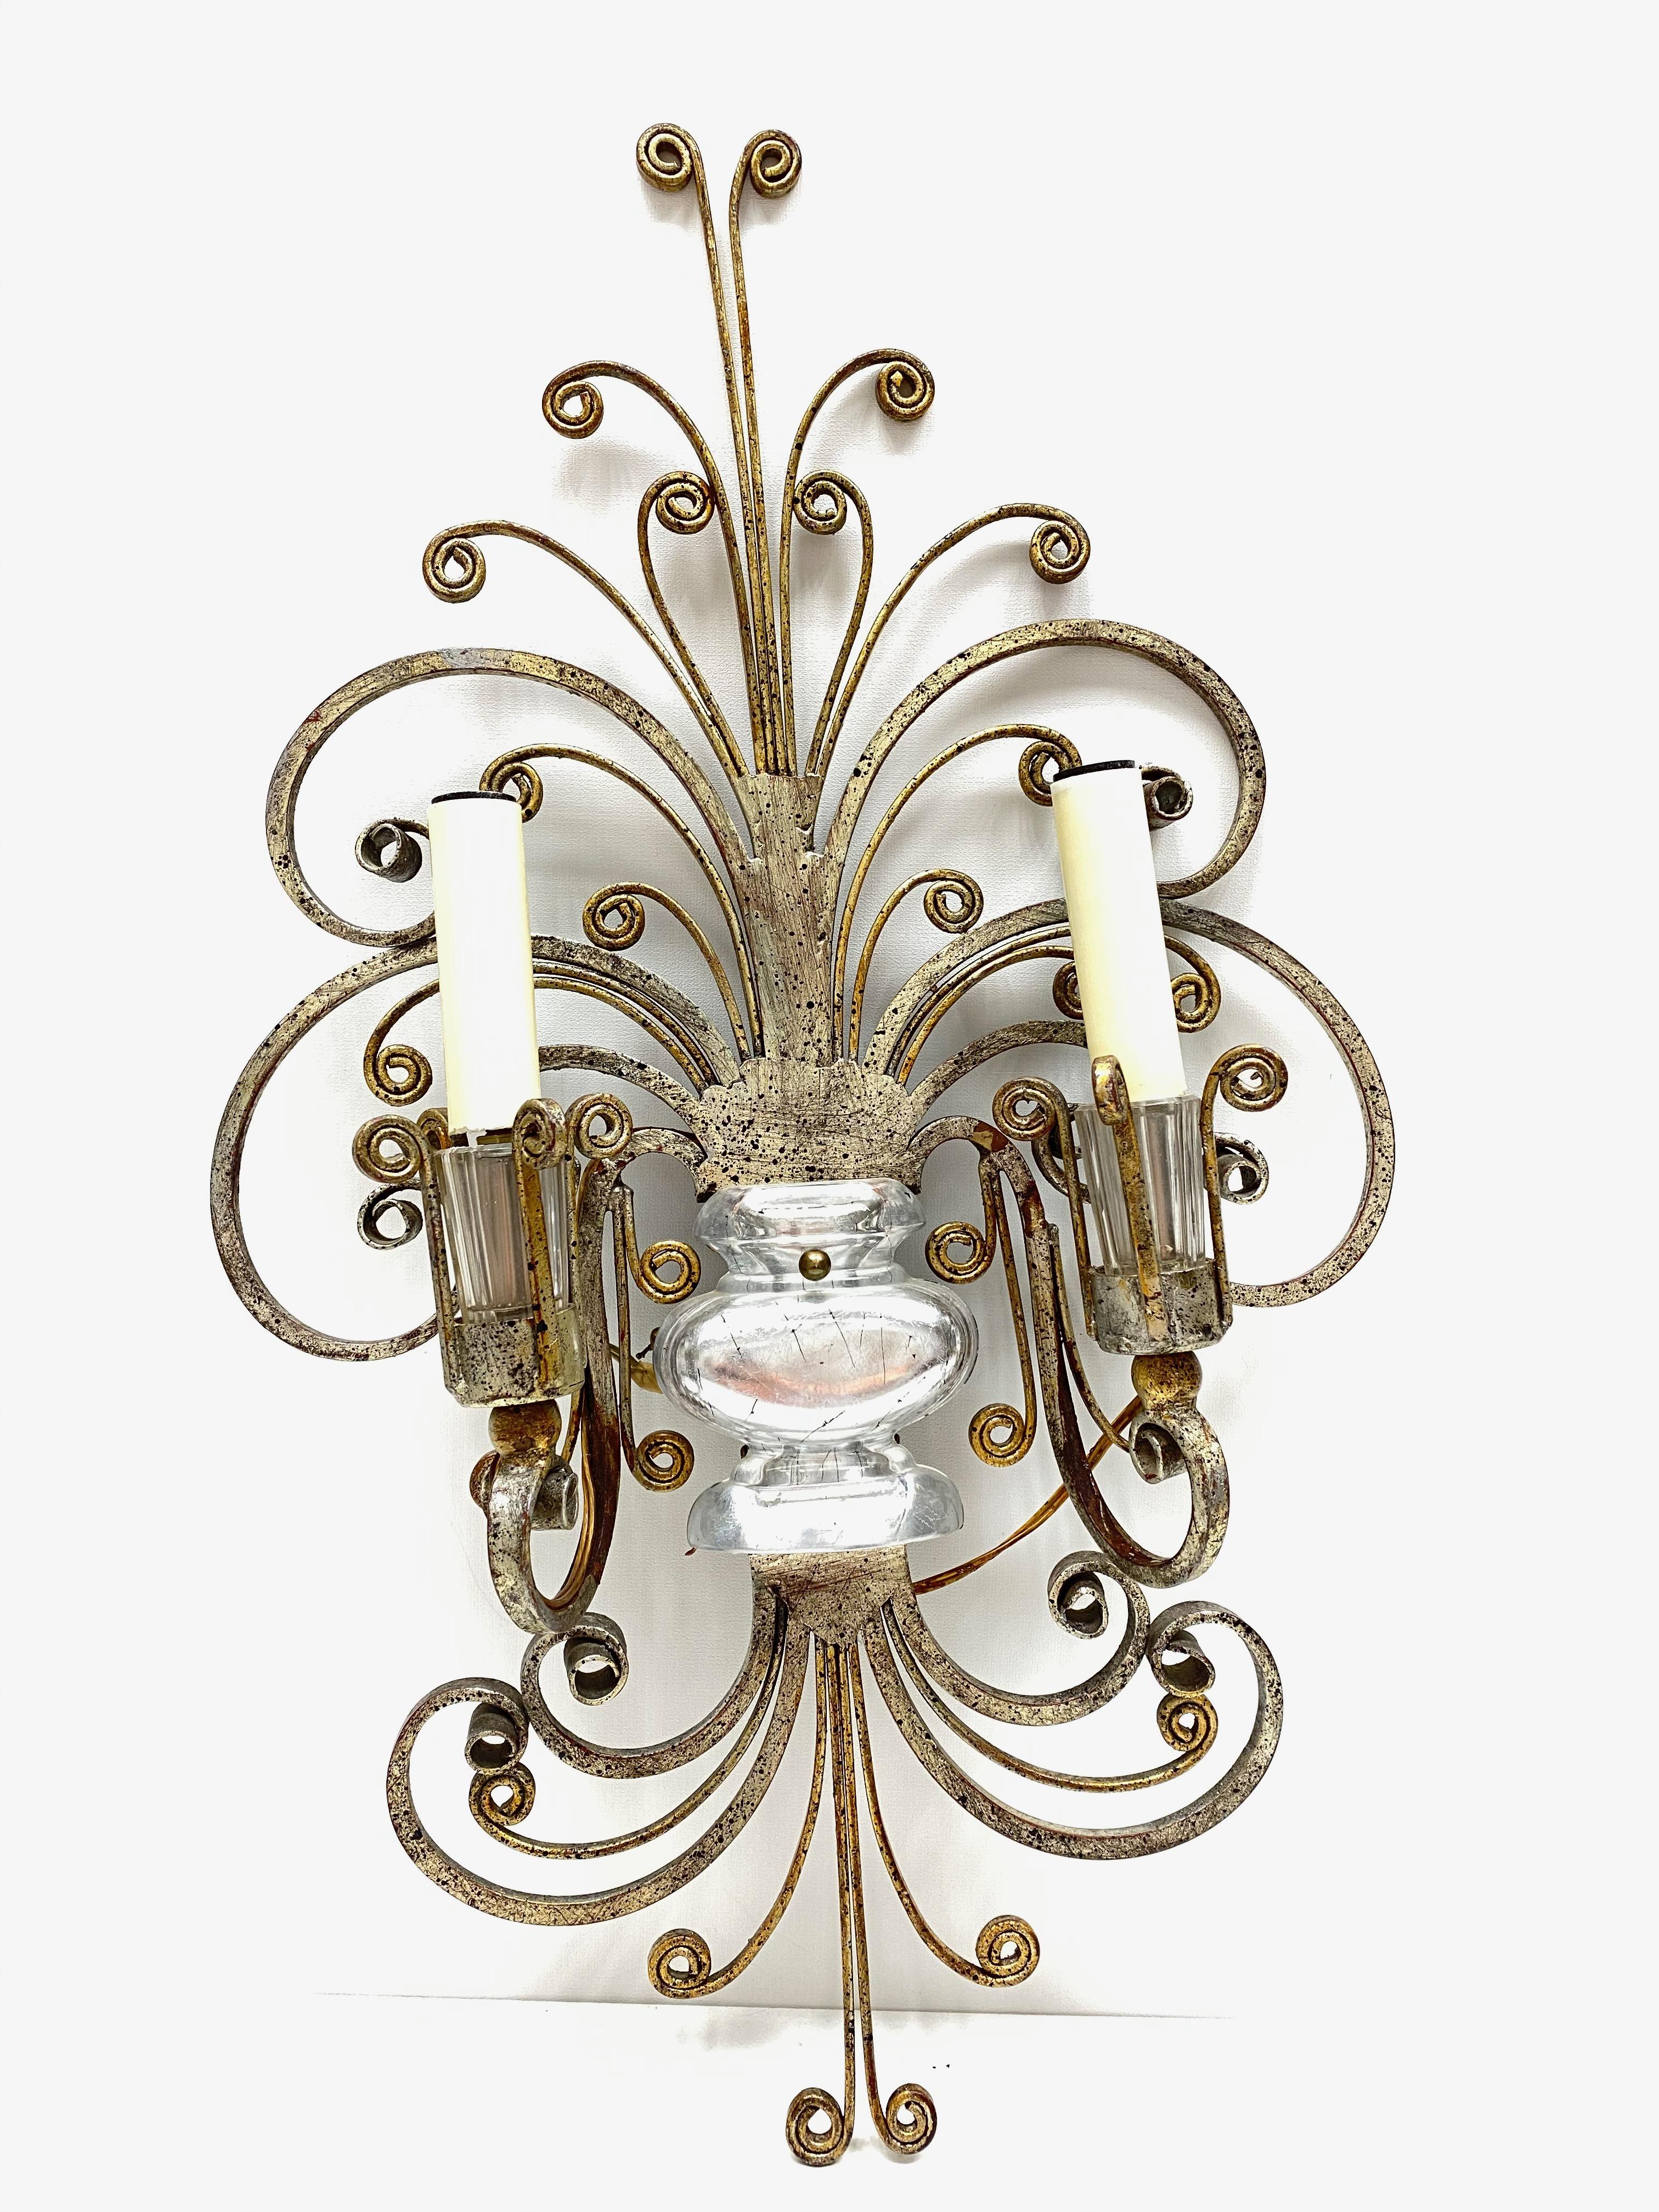 A single silver and gilded tone iron floral sconce by Banci Firenze with crystal urn motif, socket cover also made of crystal glass. The fixture requires two European E14 candelabra bulbs, each bulb up to 40 watts. The wall light has a beautiful